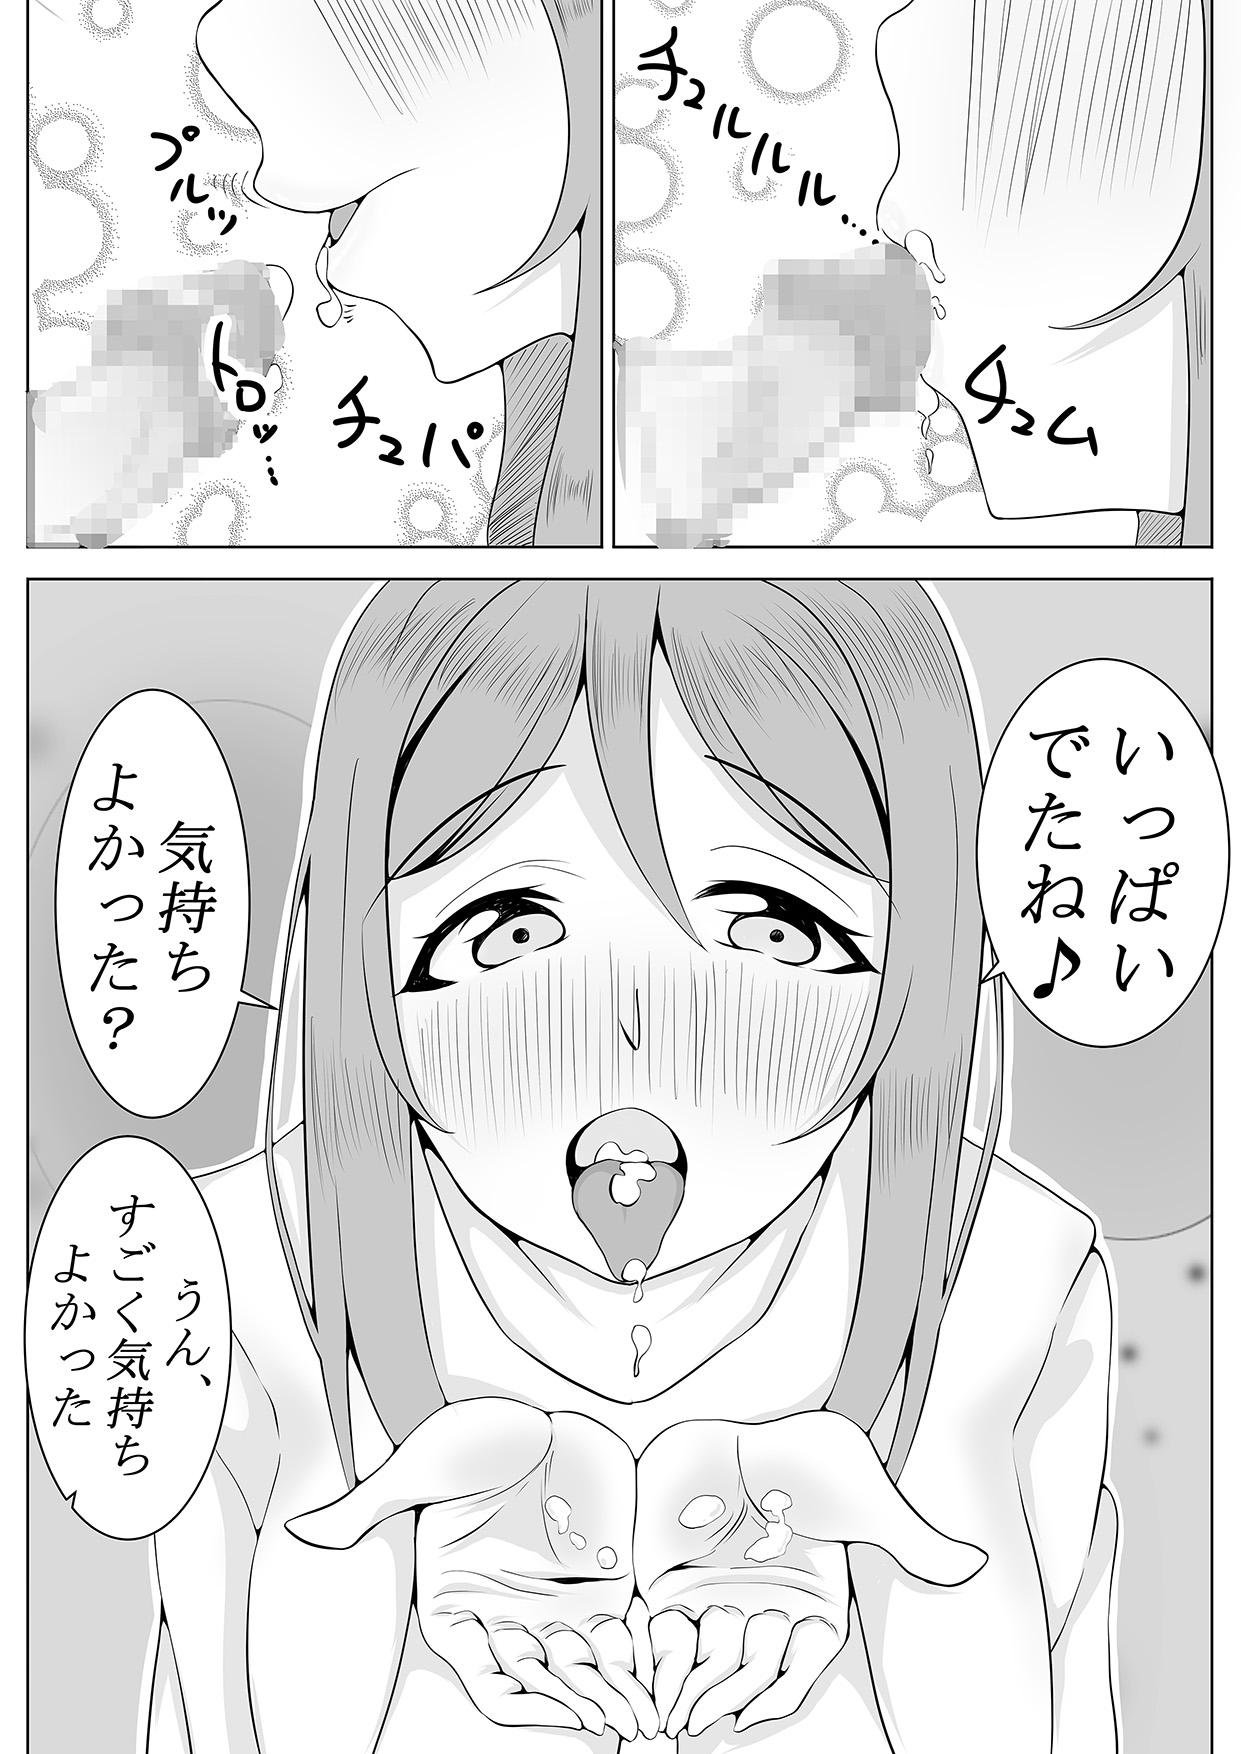 Sextape 小さい子、お預かりします。 We take care of a small boy - Love live sunshine Camshow - Page 11